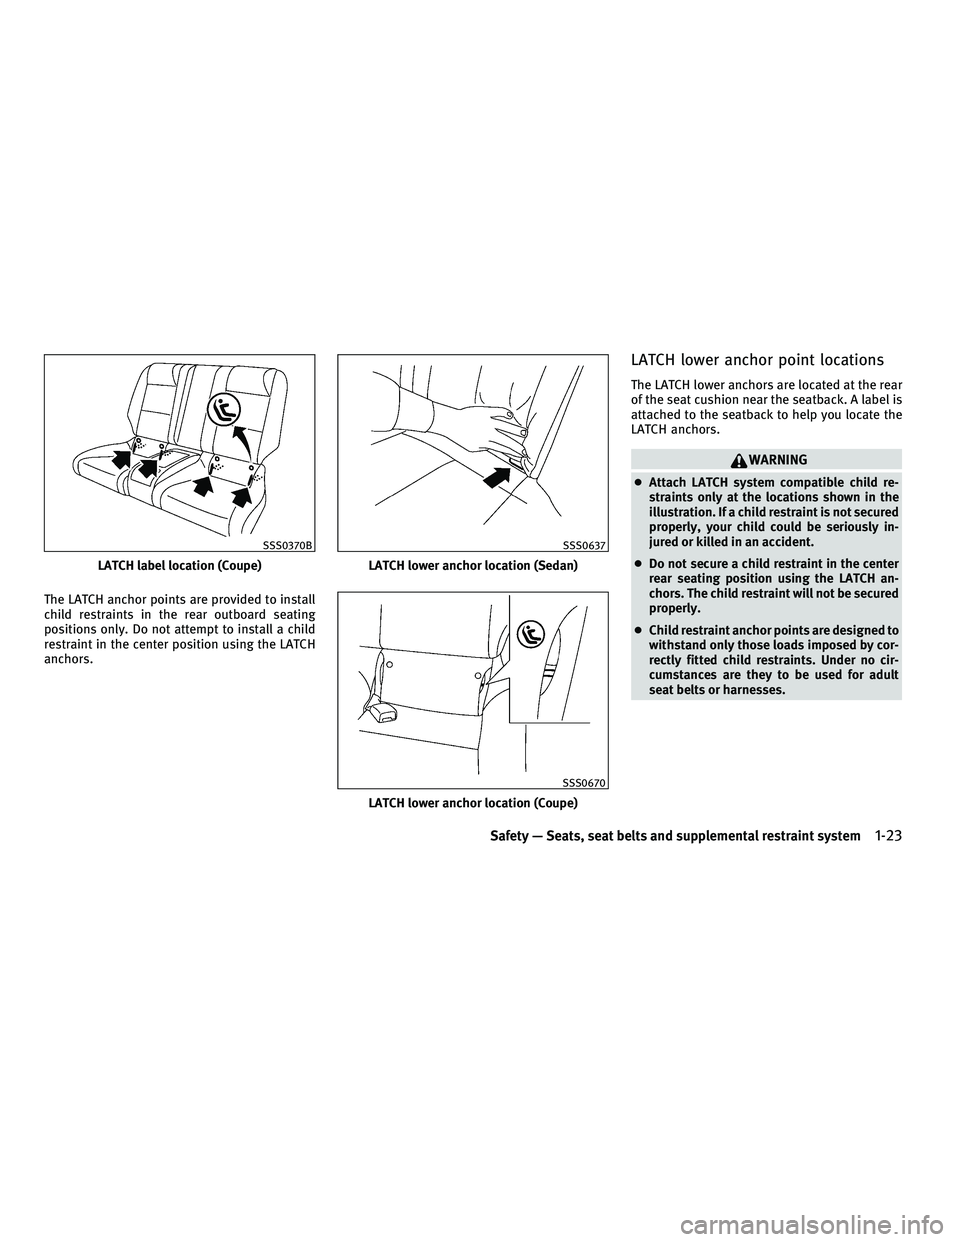 INFINITI G 2010 Service Manual The LATCH anchor points are provided to install
child restraints in the rear outboard seating
positions only. Do not attempt to install a child
restraint in the center position using the LATCH
anchors